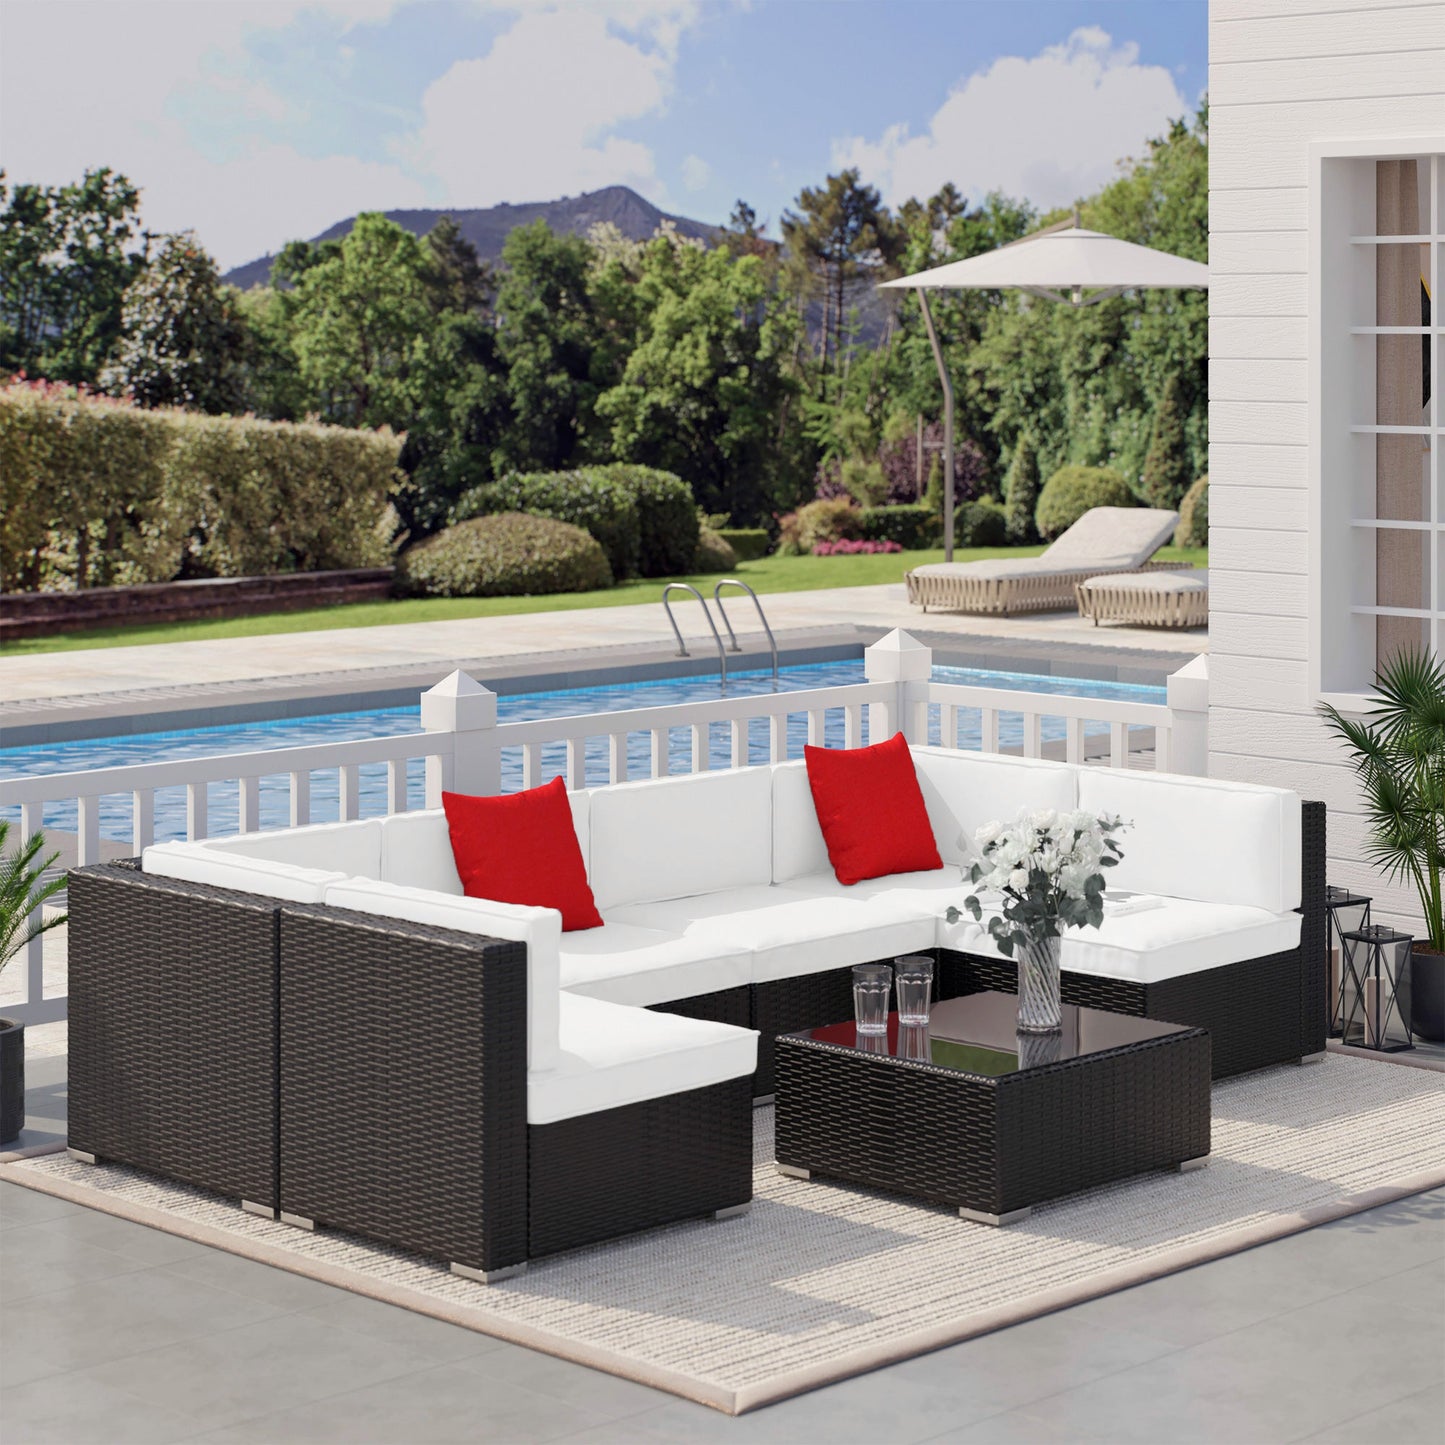 Outdoor and Garden-7 Piece Patio Furniture Set,Outdoor Rattan Sectional Sofa with White Cushions - Outdoor Style Company